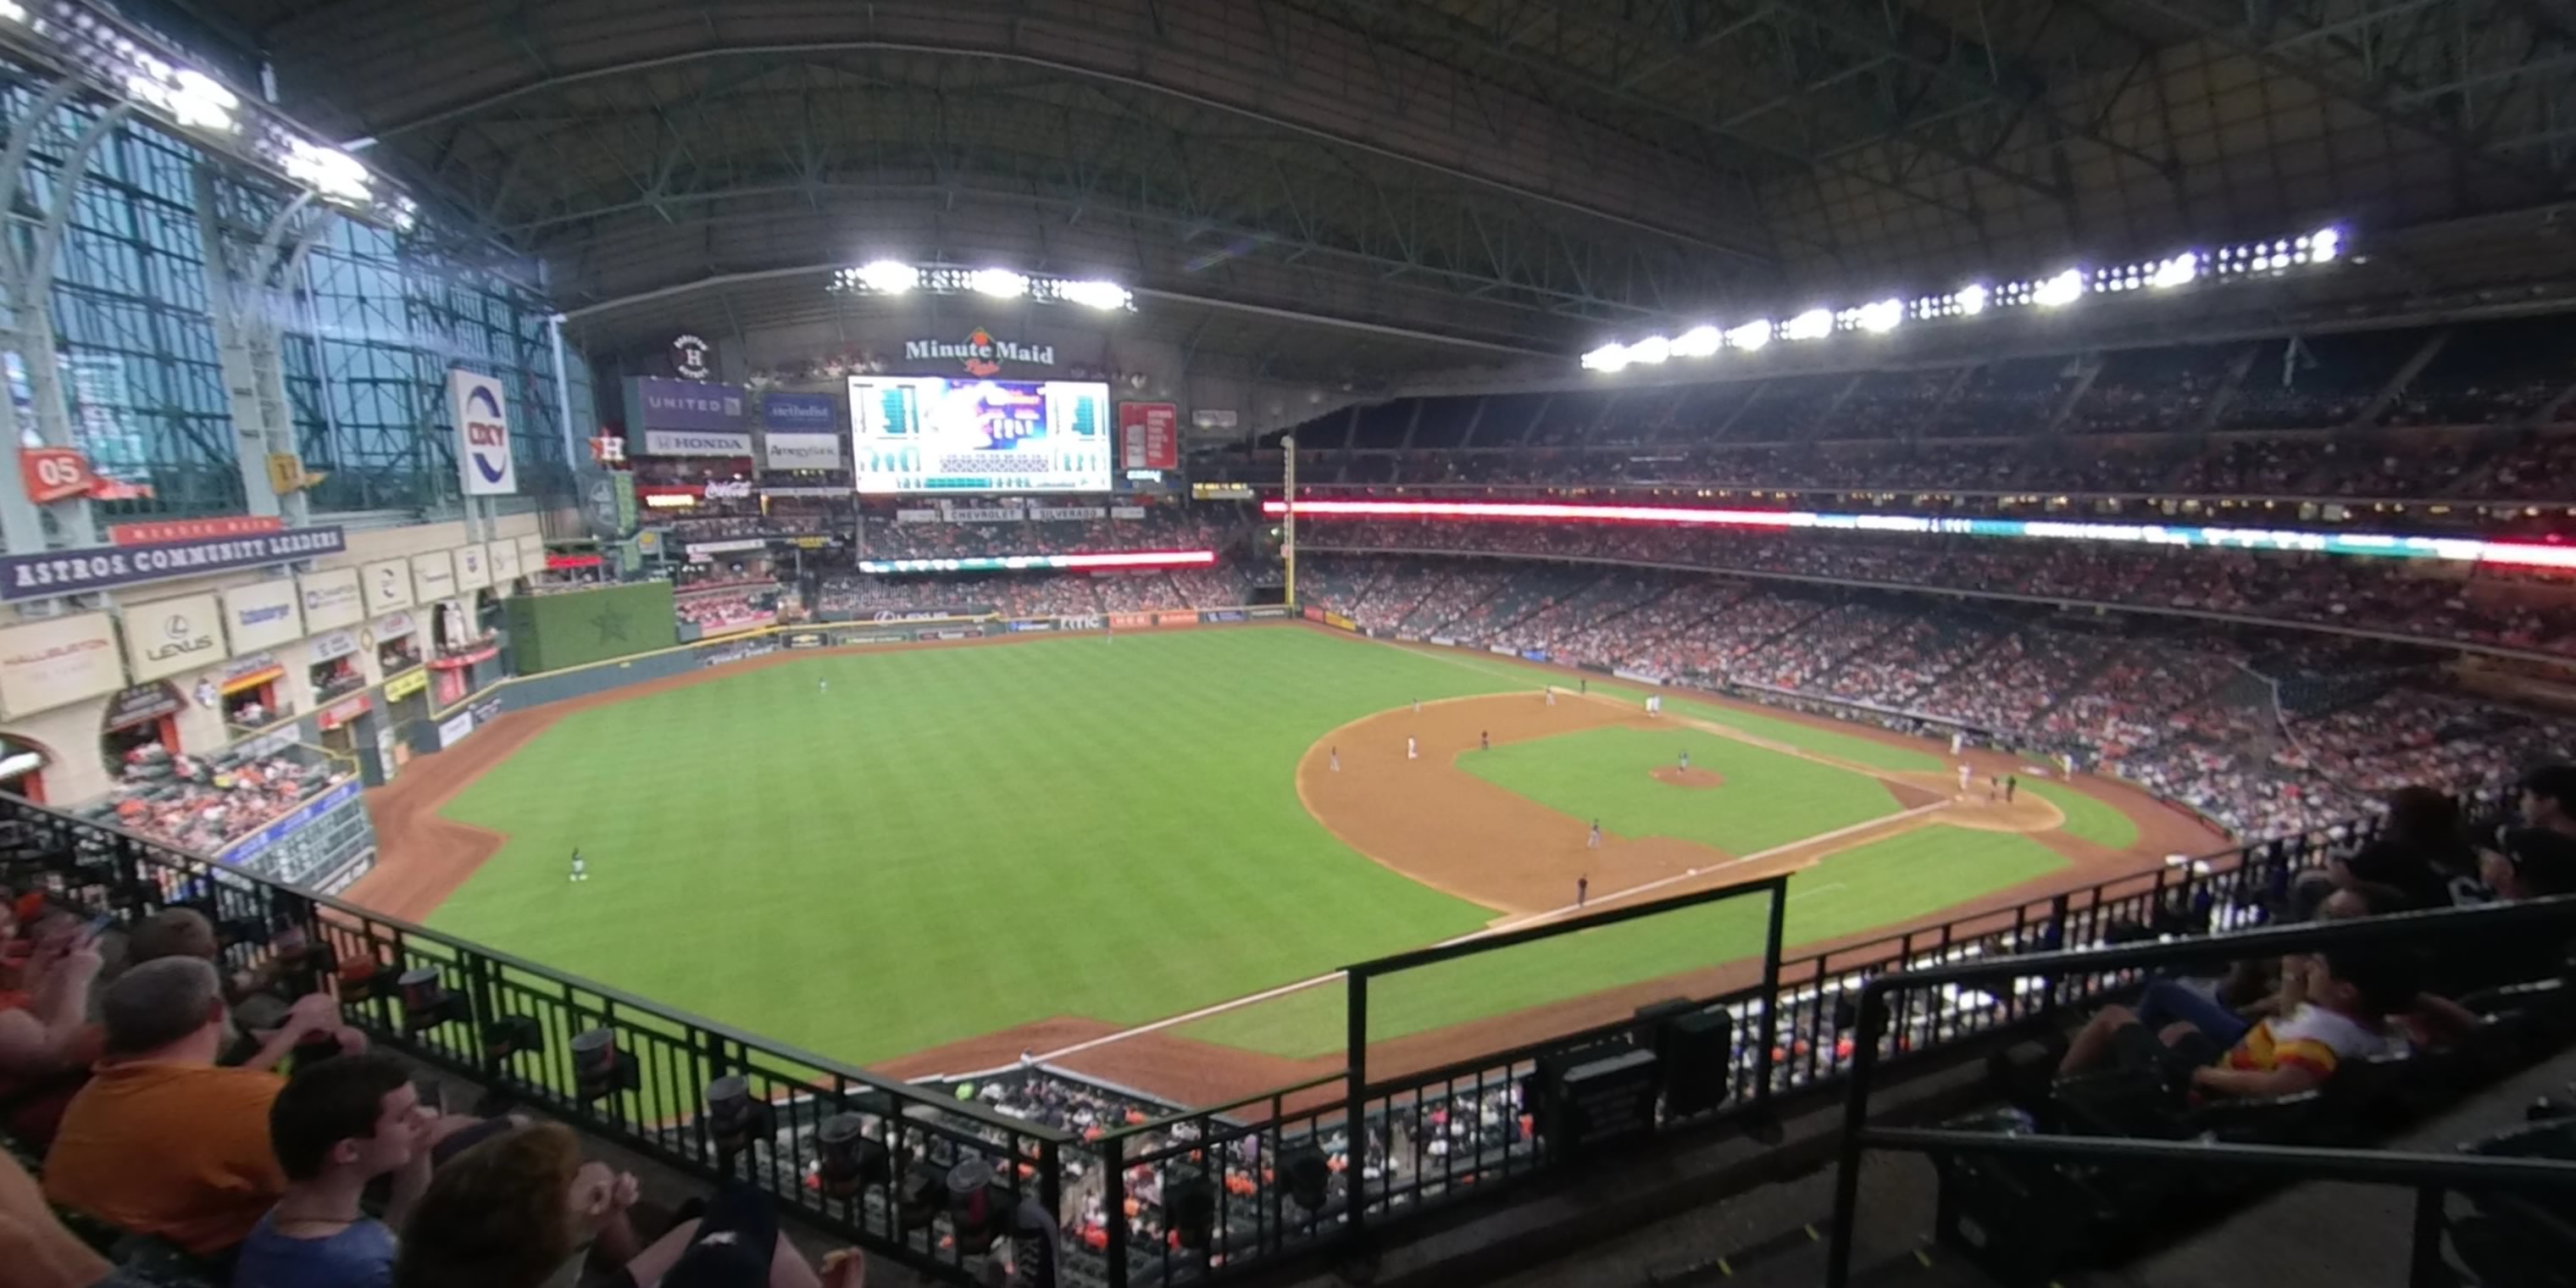 Section 309 at Minute Maid Park 